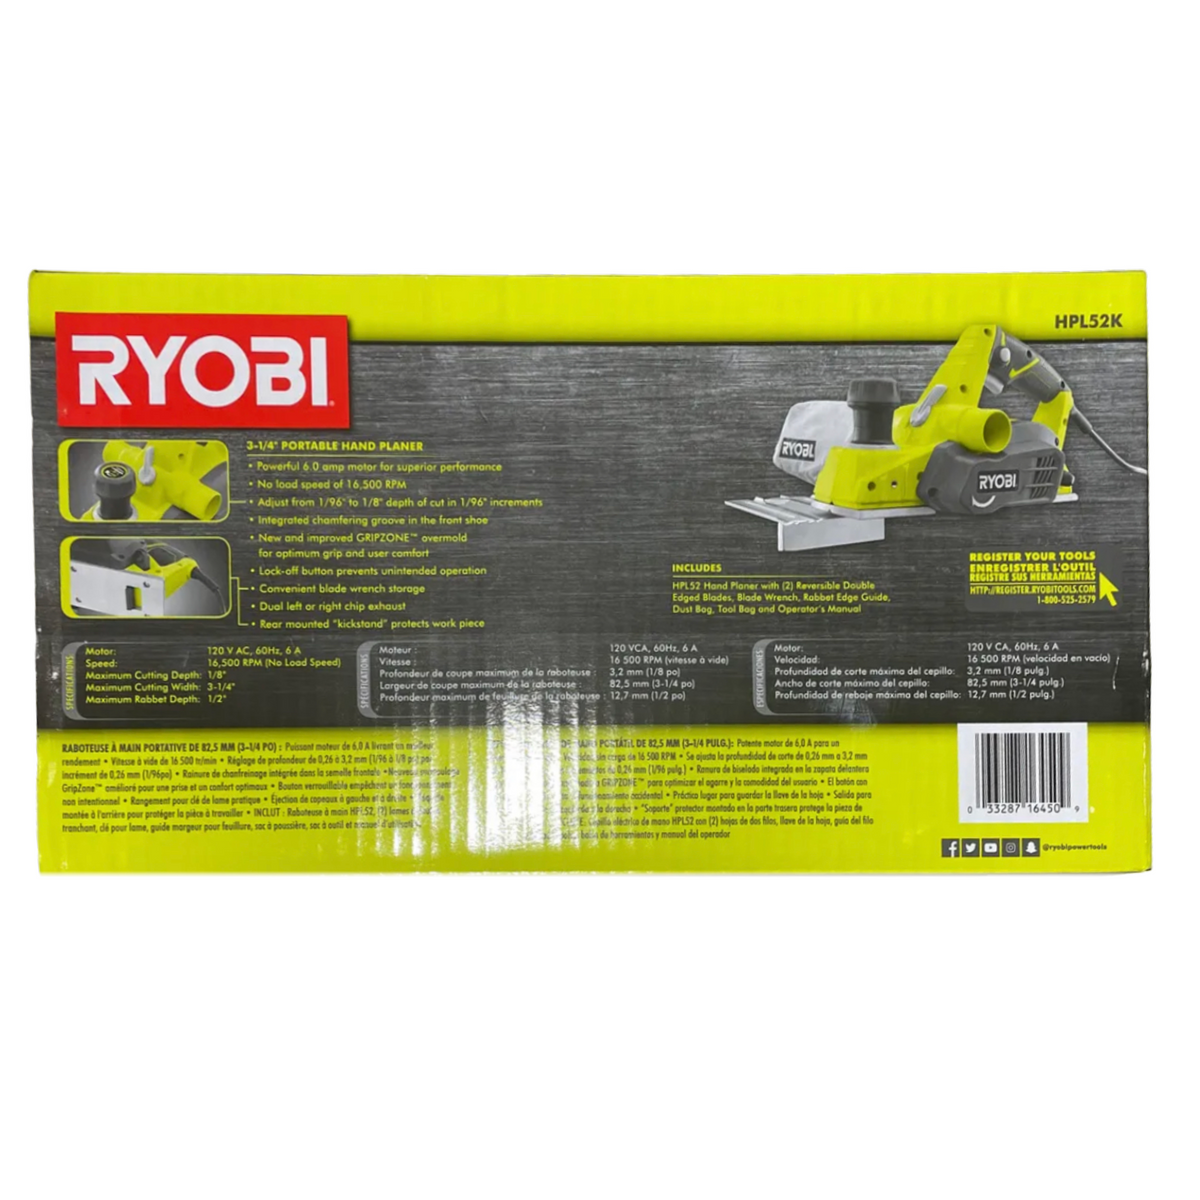 RYOBI Amp Corded 3-1/4 in. Hand Planer with Dust Bag – Ryobi Deal Finders